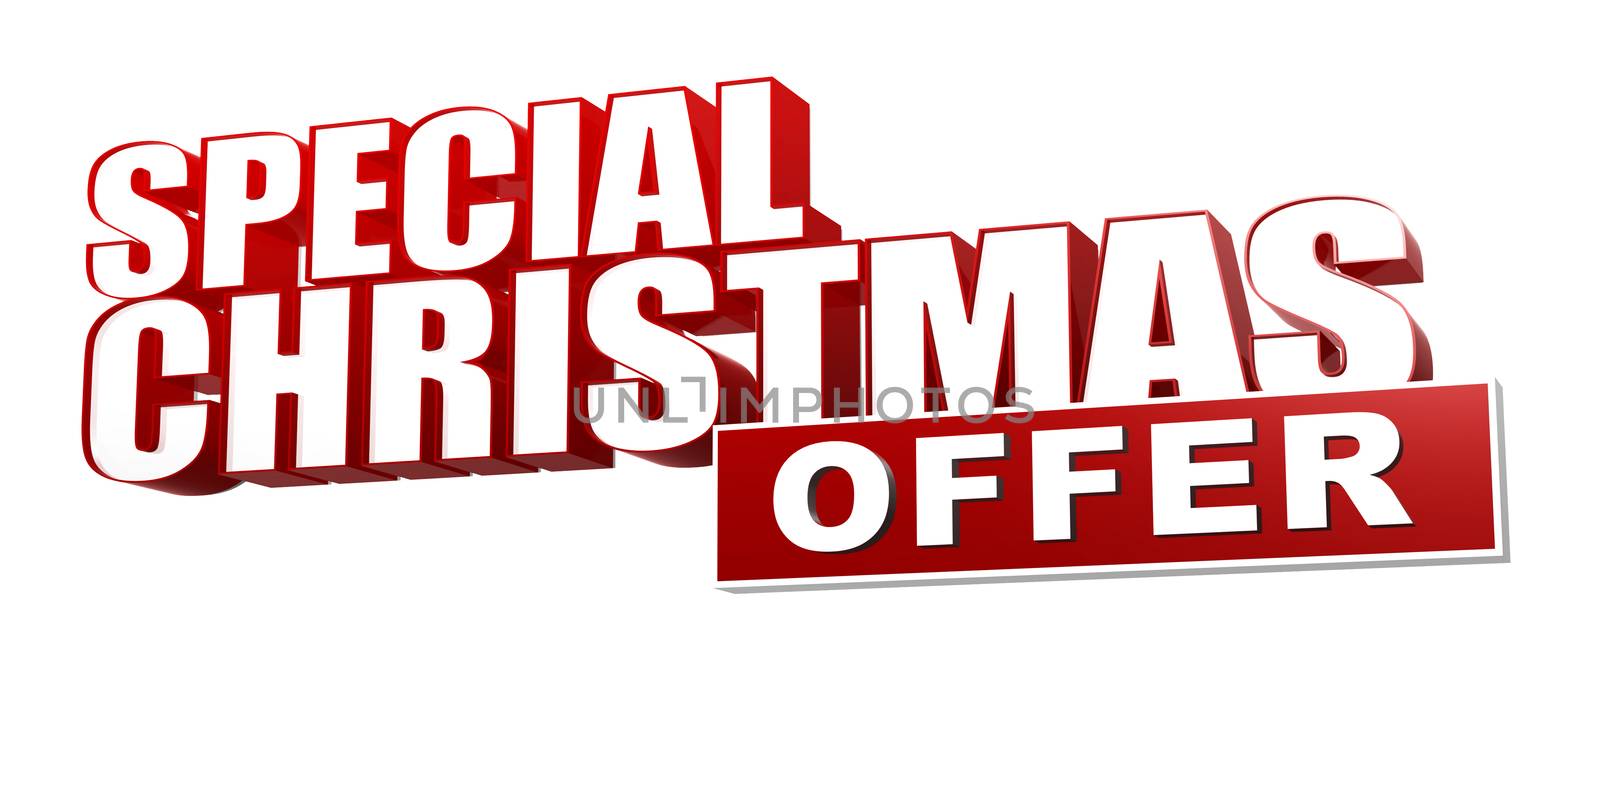 special christmas offer in 3d red letters and block by marinini